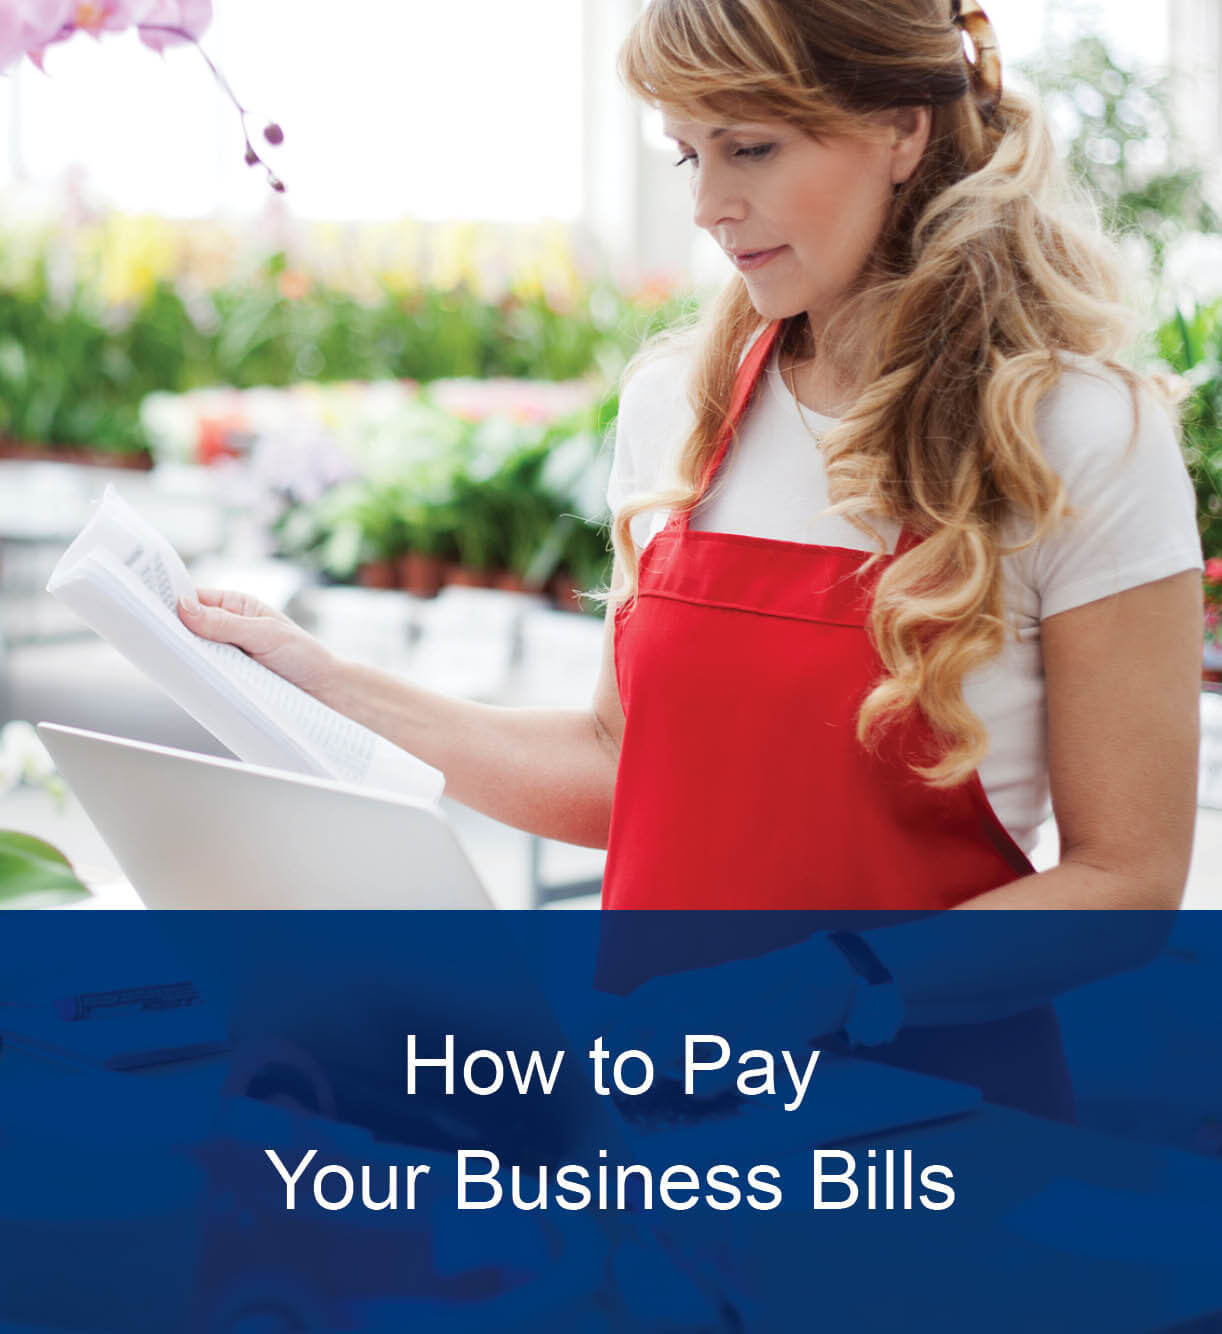 How to Pay Your Business Bills